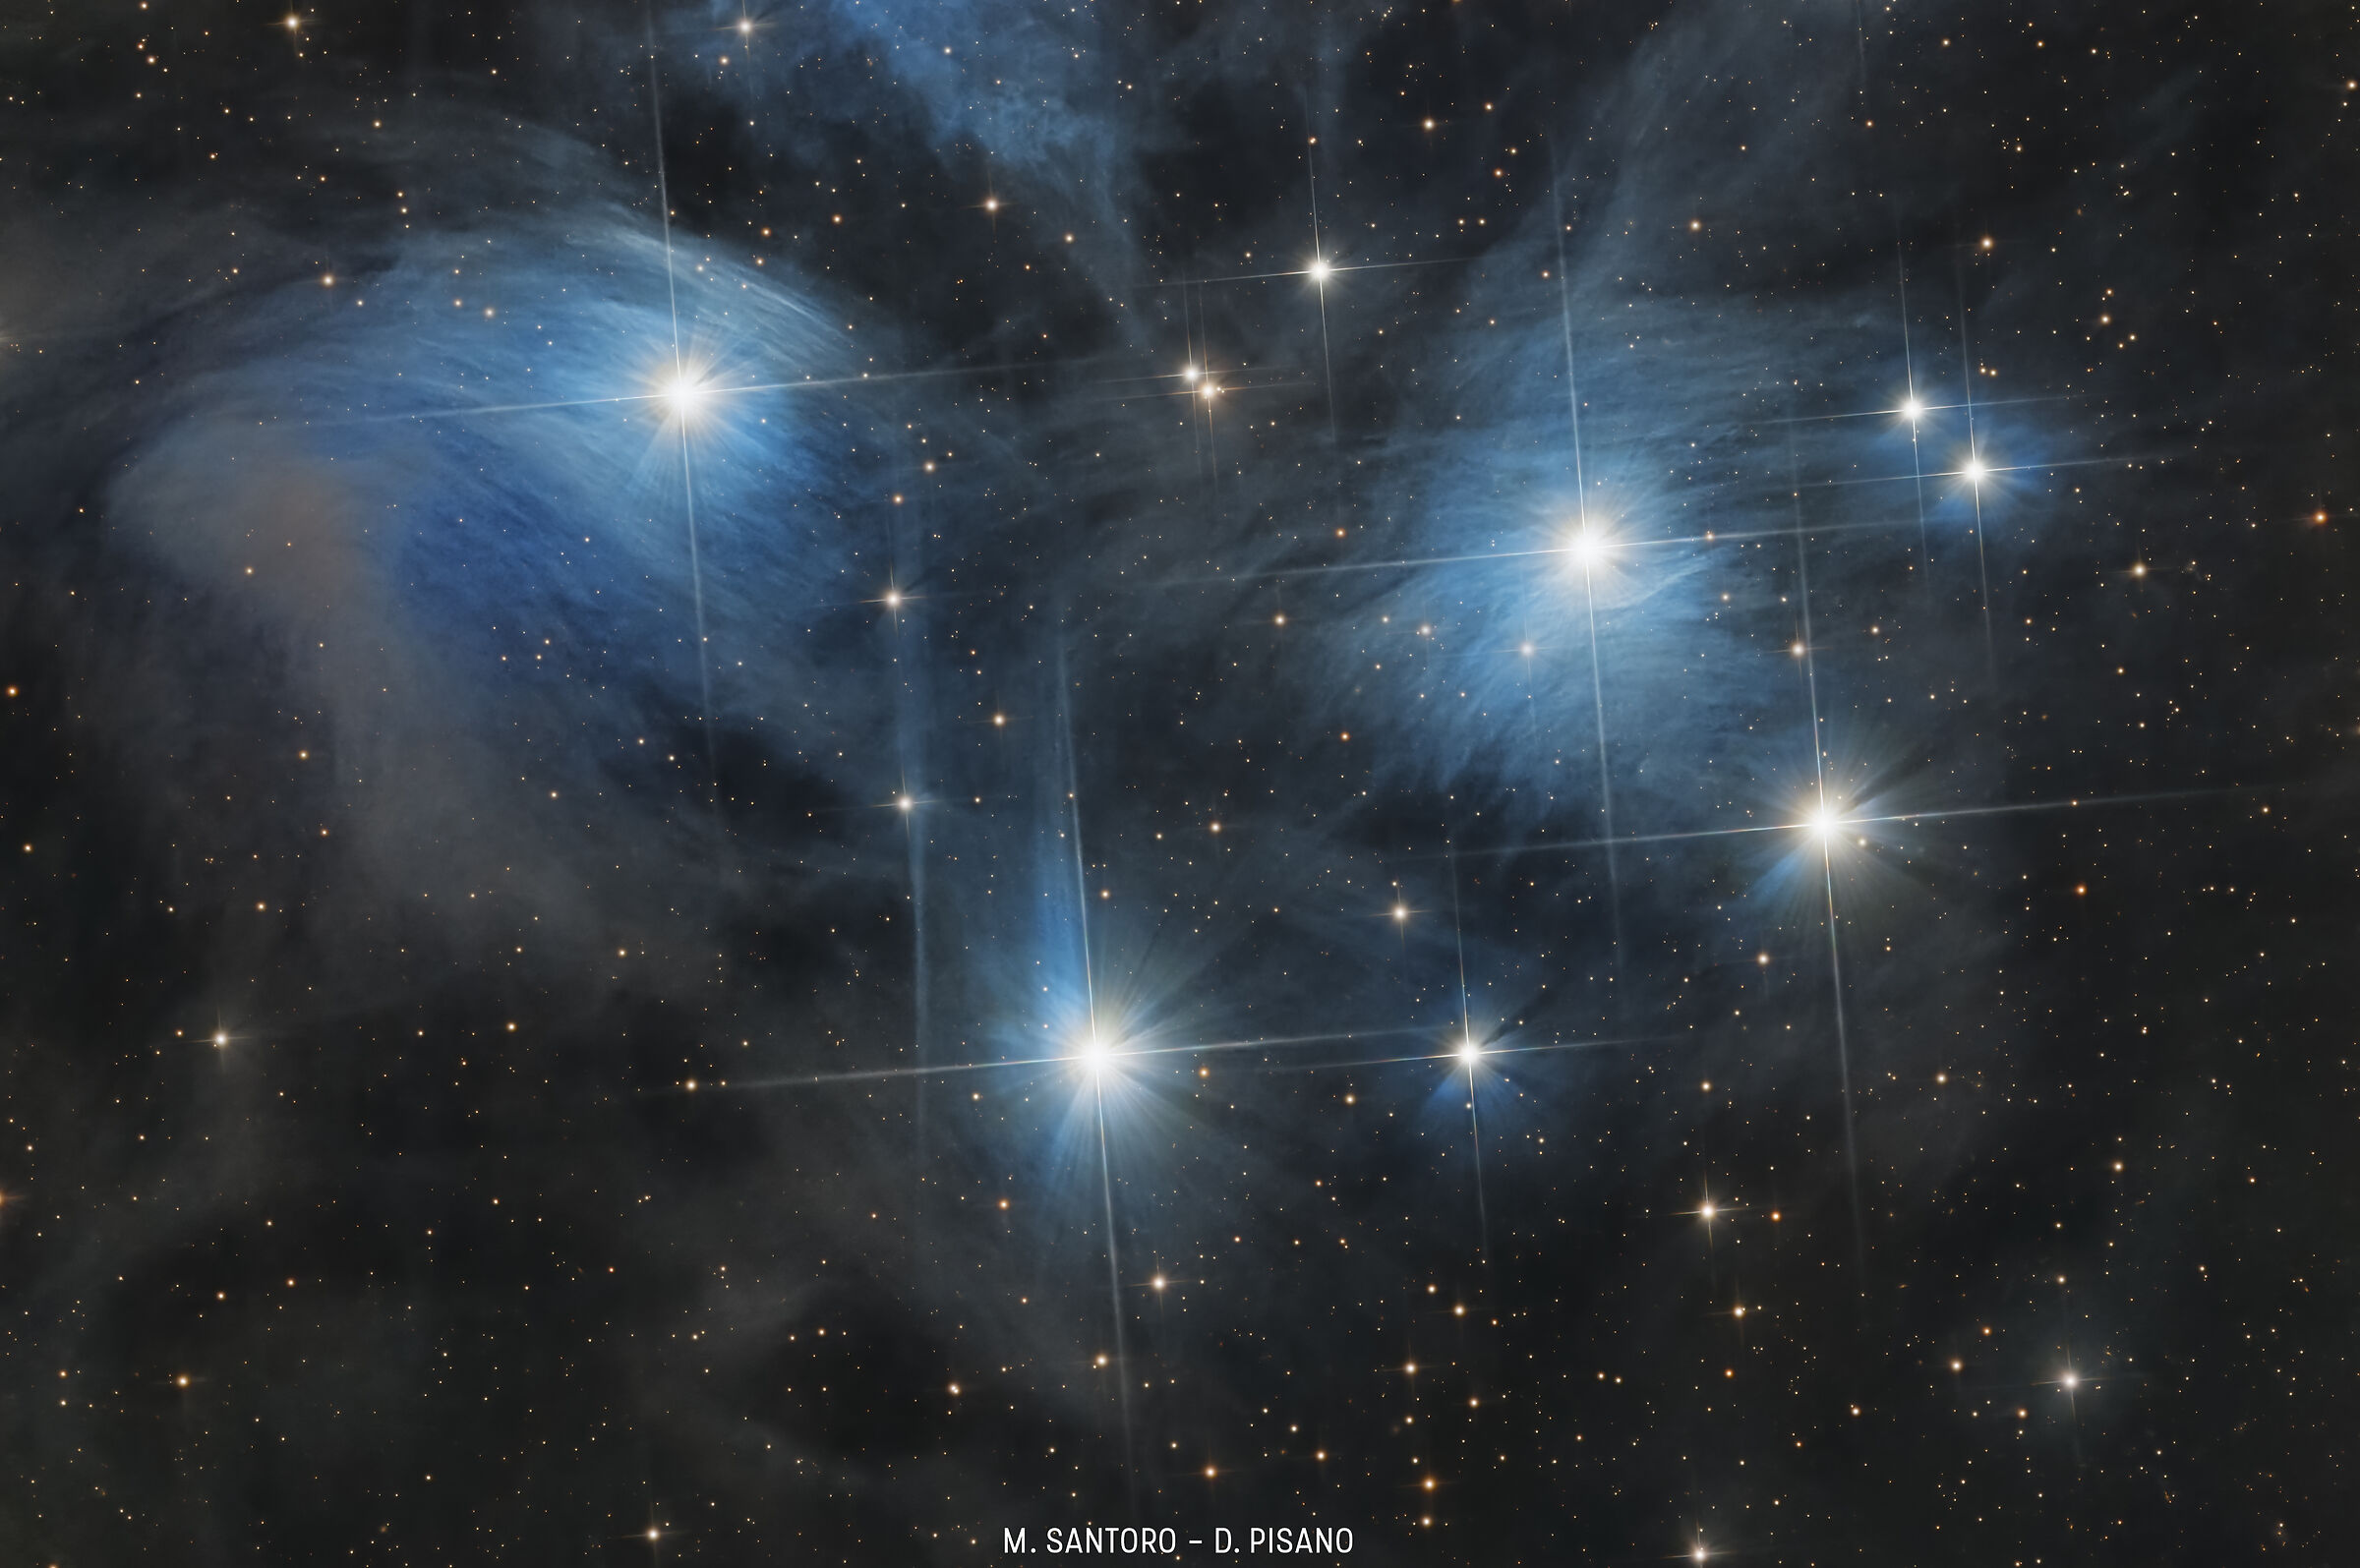 Zooming in on the Pleiades...